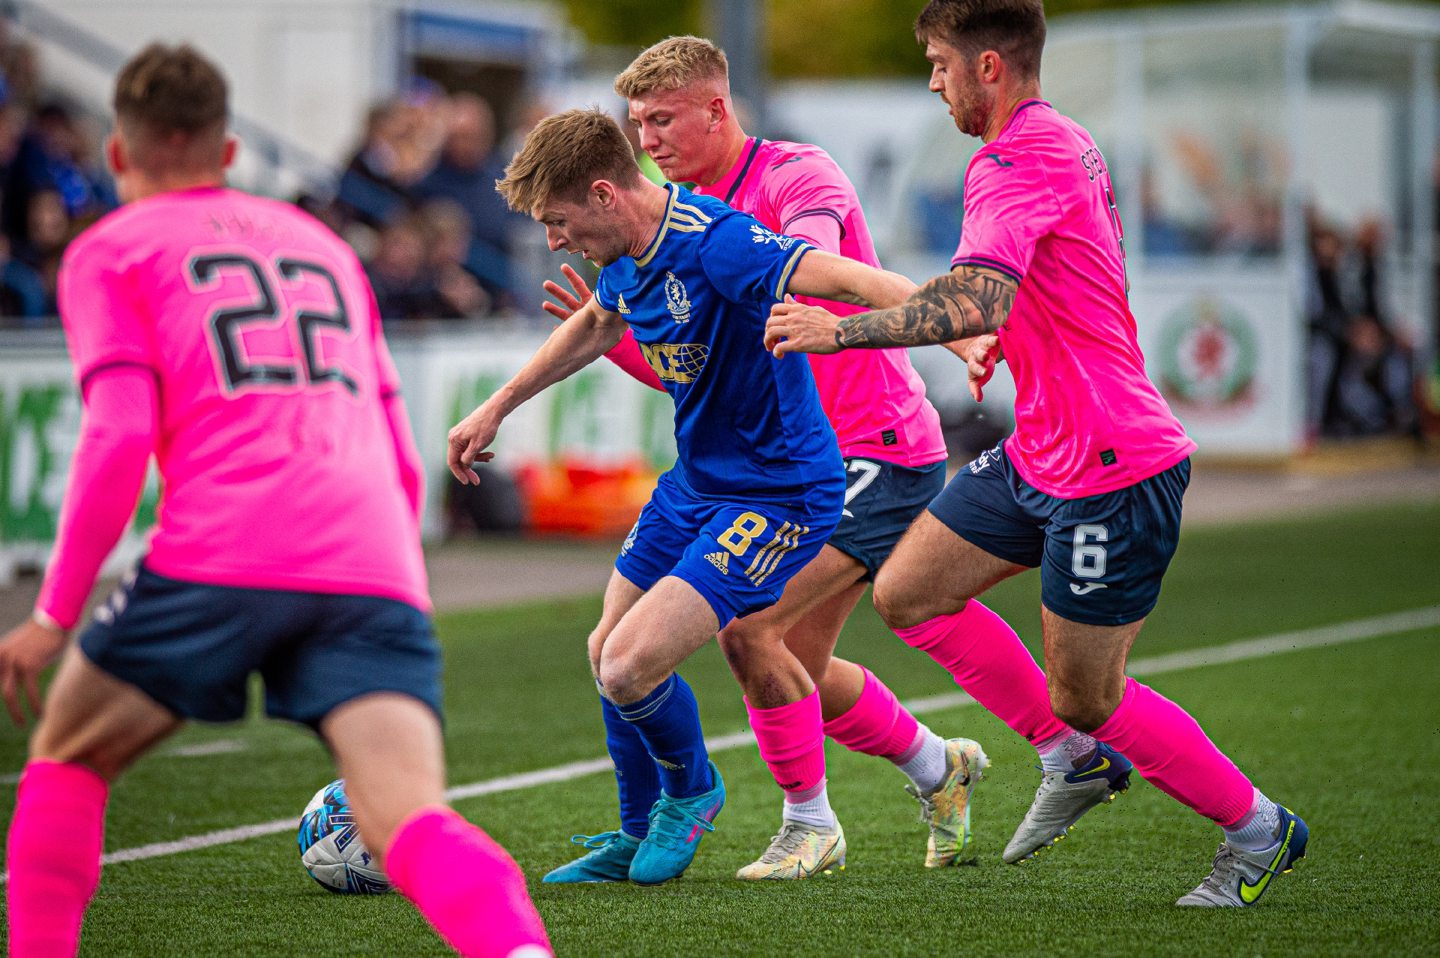 Blair Yule in action for Cove against Raith Rovers at Balmoral Stadium.